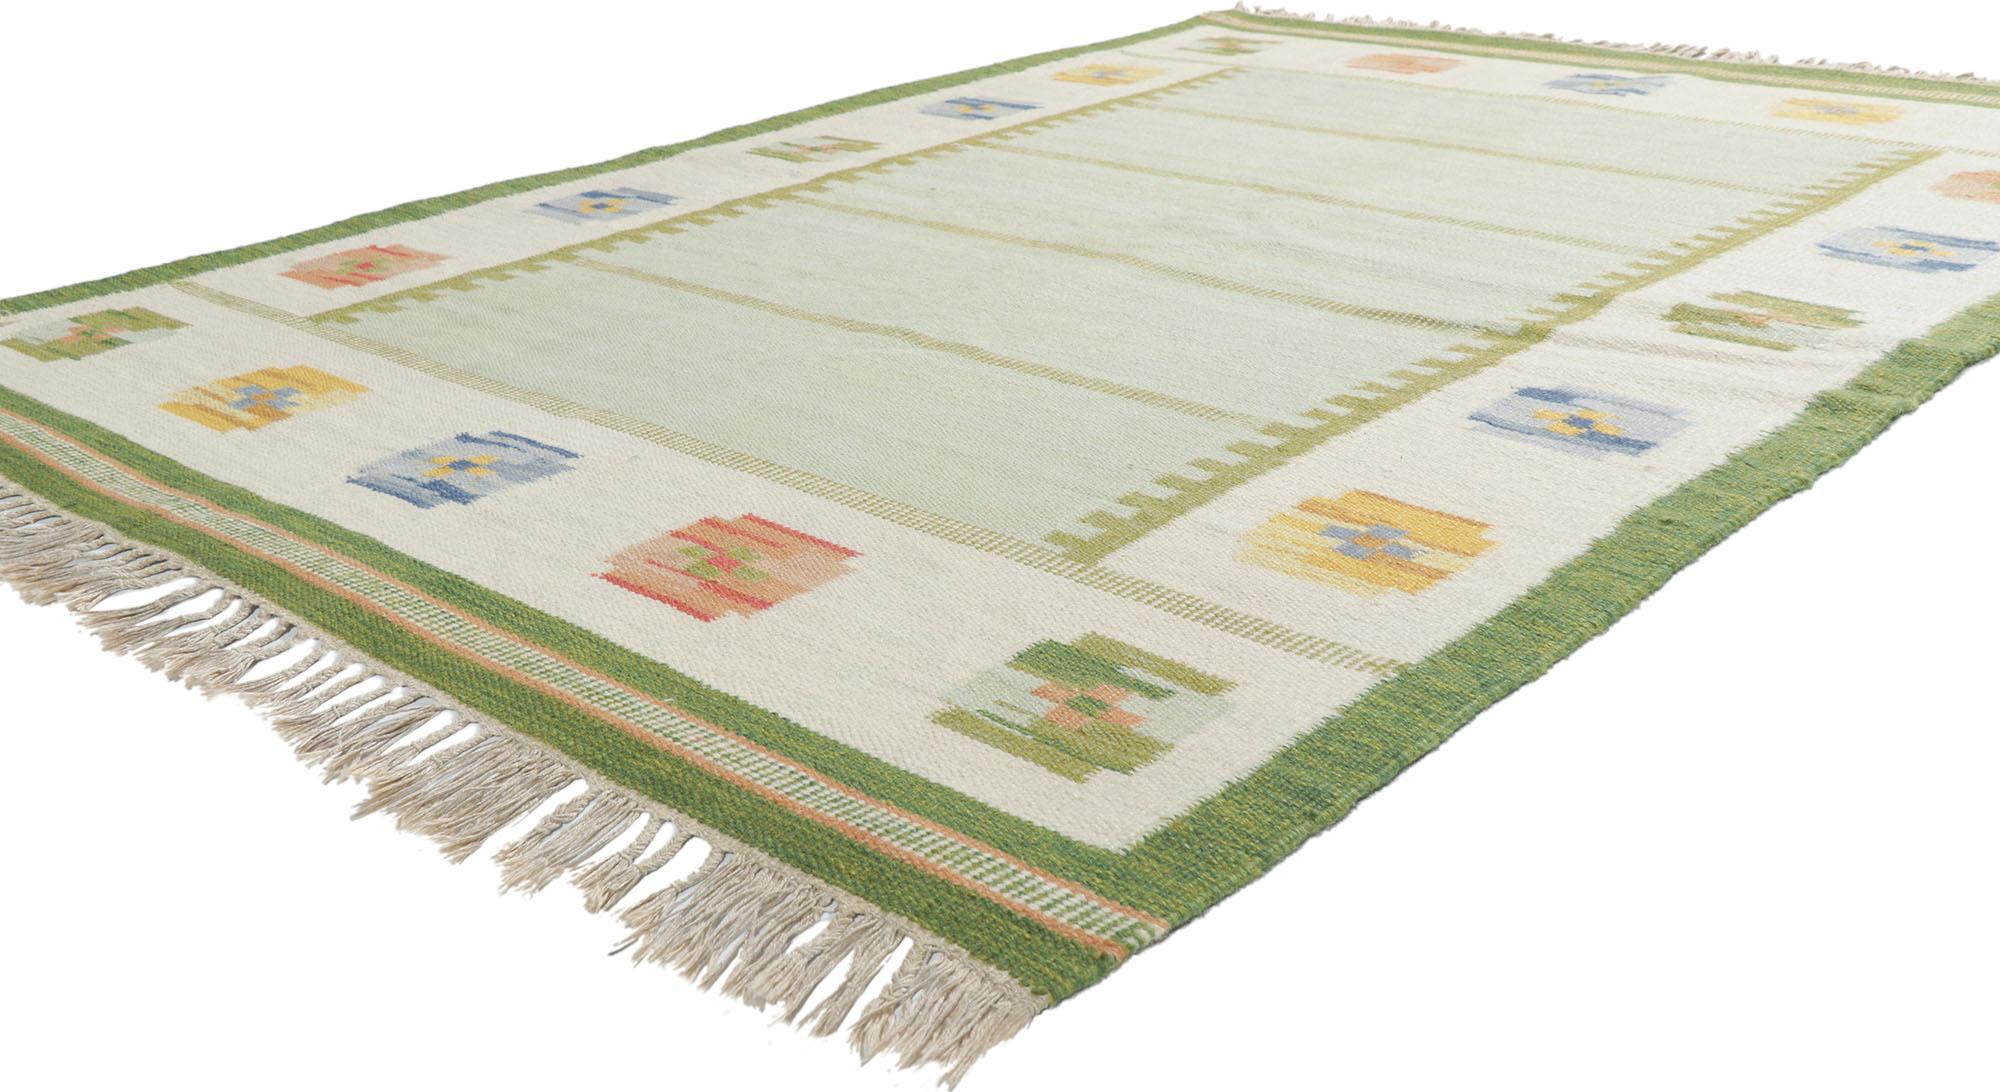 78267 Vintage Swedish Kilim Rollakan Rug, 05'06 x 08'00. Highlighting Scandinavian Modern style with incredible detail and texture, this handwoven wool vintage Swedish rollakan rug is a captivating vision of woven beauty. The Biophilic Design and